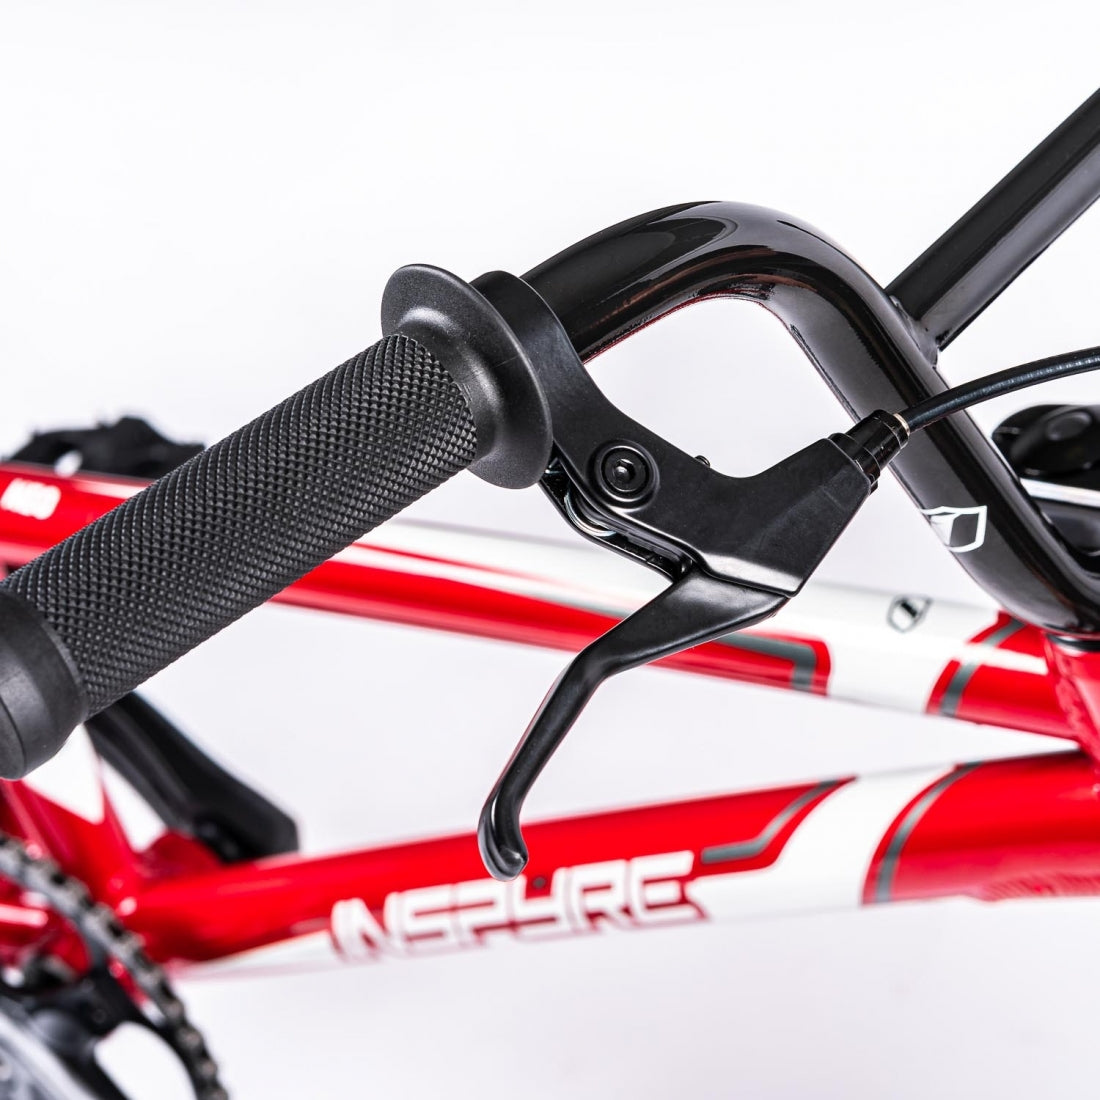 Close-up of an Inspyre Neo Junior Bike's handlebar, brake lever, and gear shifter with a red and white frame in the background.